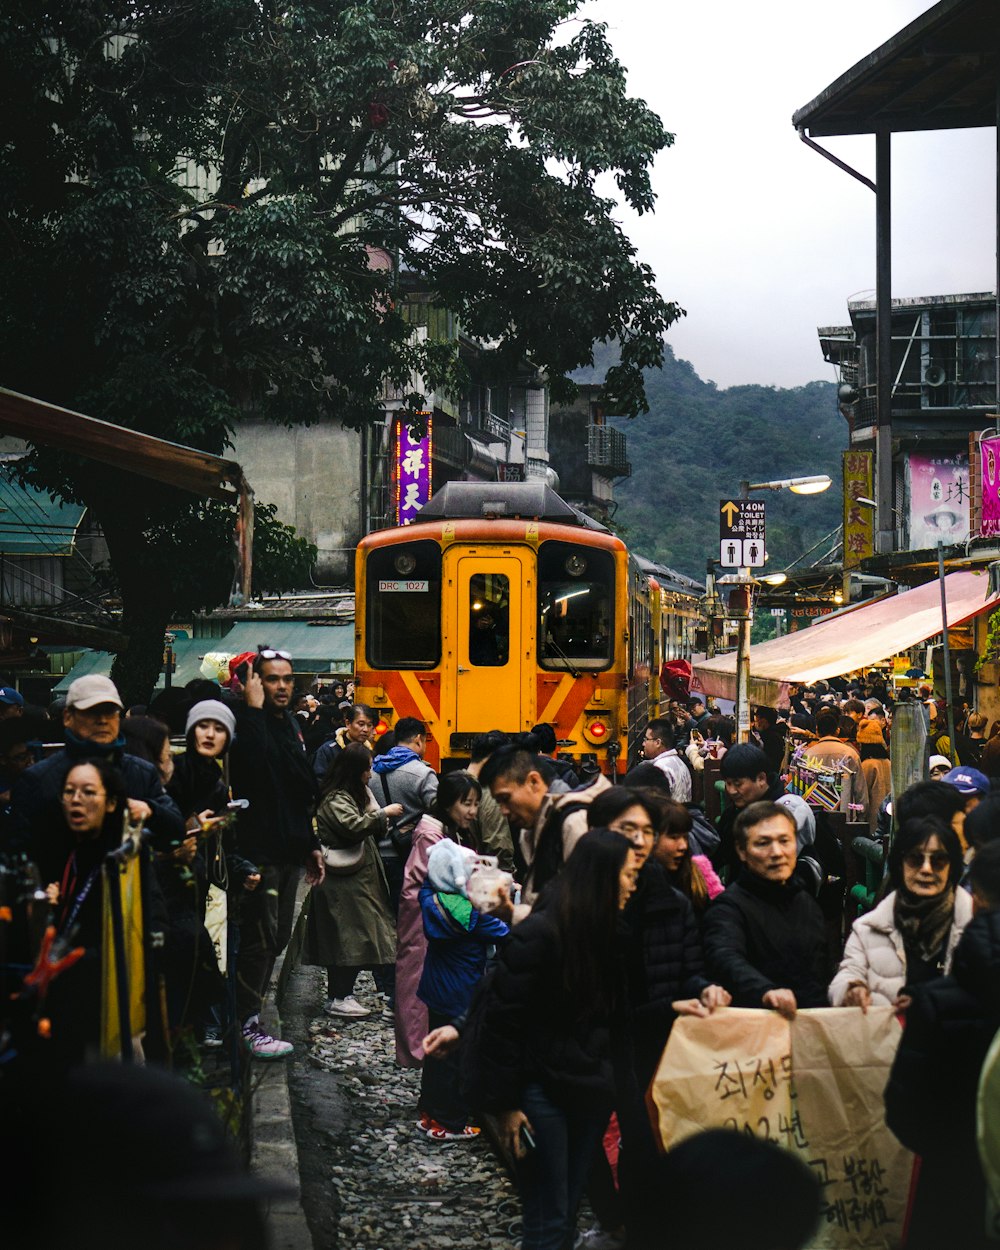 a crowd of people walking down a street next to a train